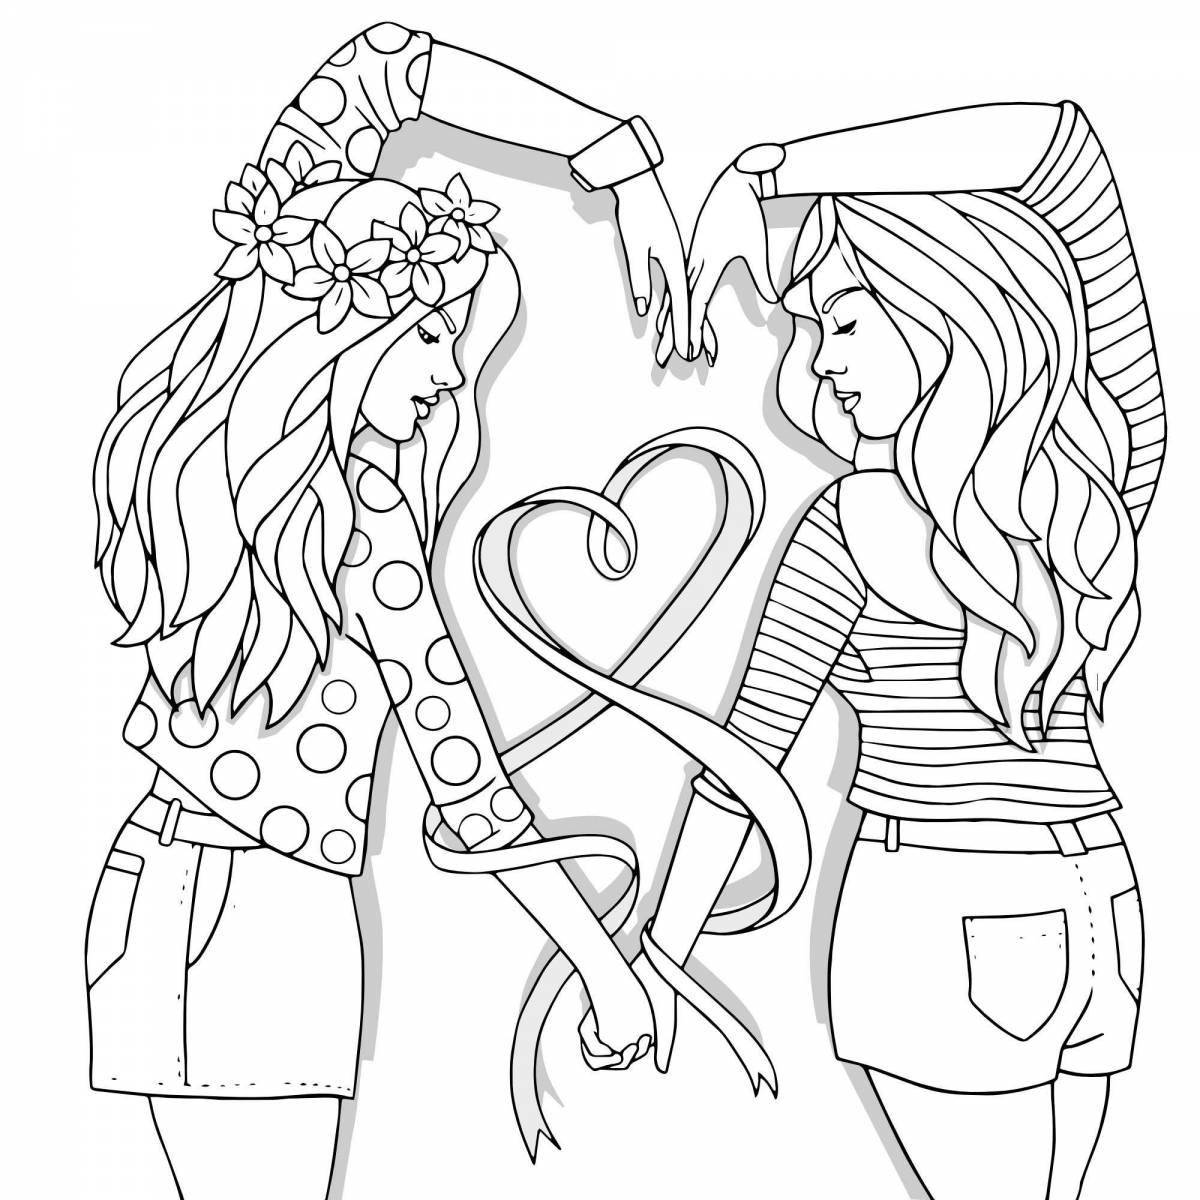 Charming 18 year old coloring book